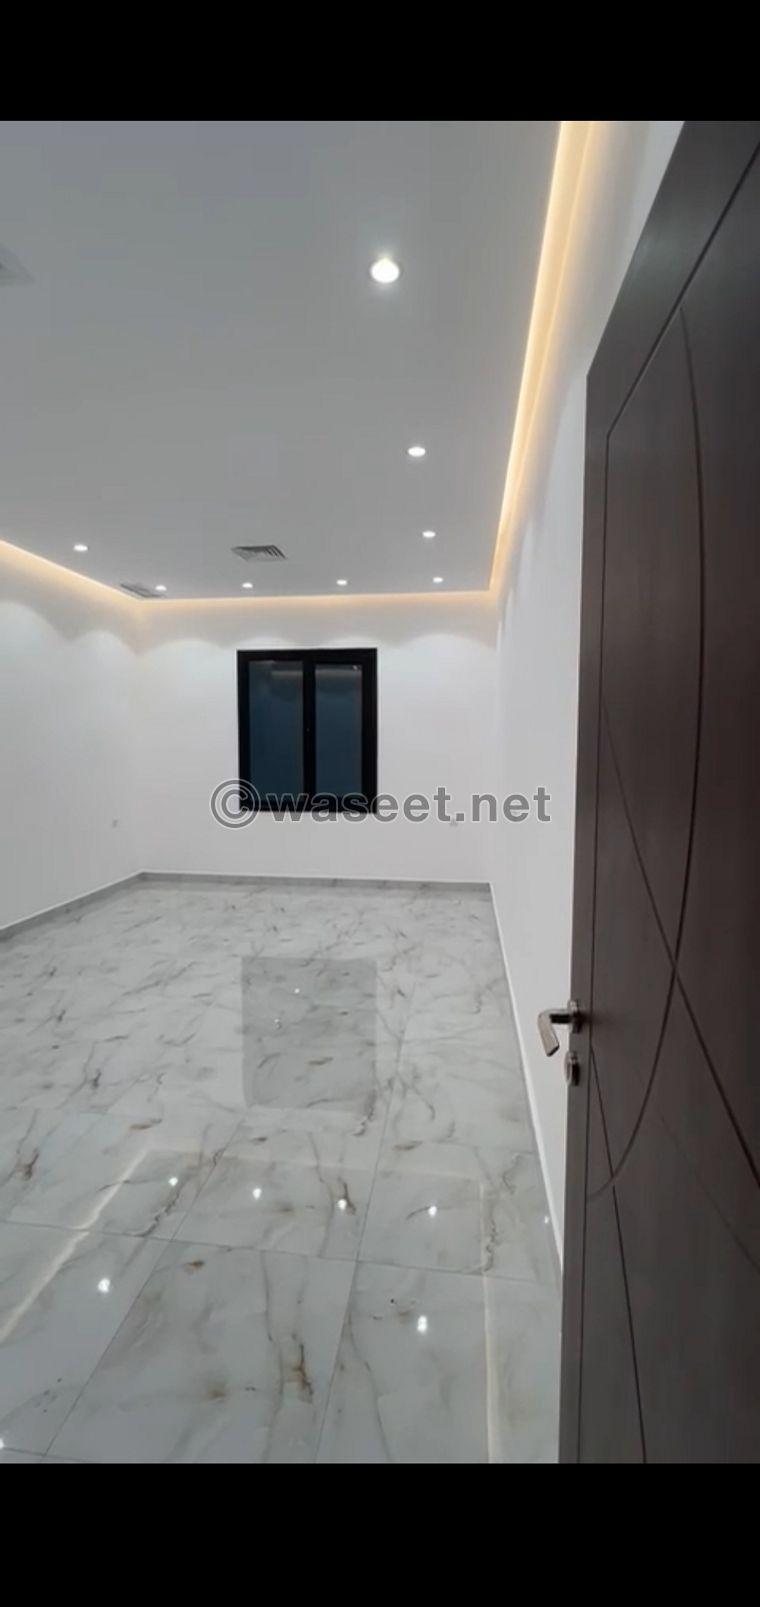 Two luxurious apartments for rent in Al-Mutlaa 0